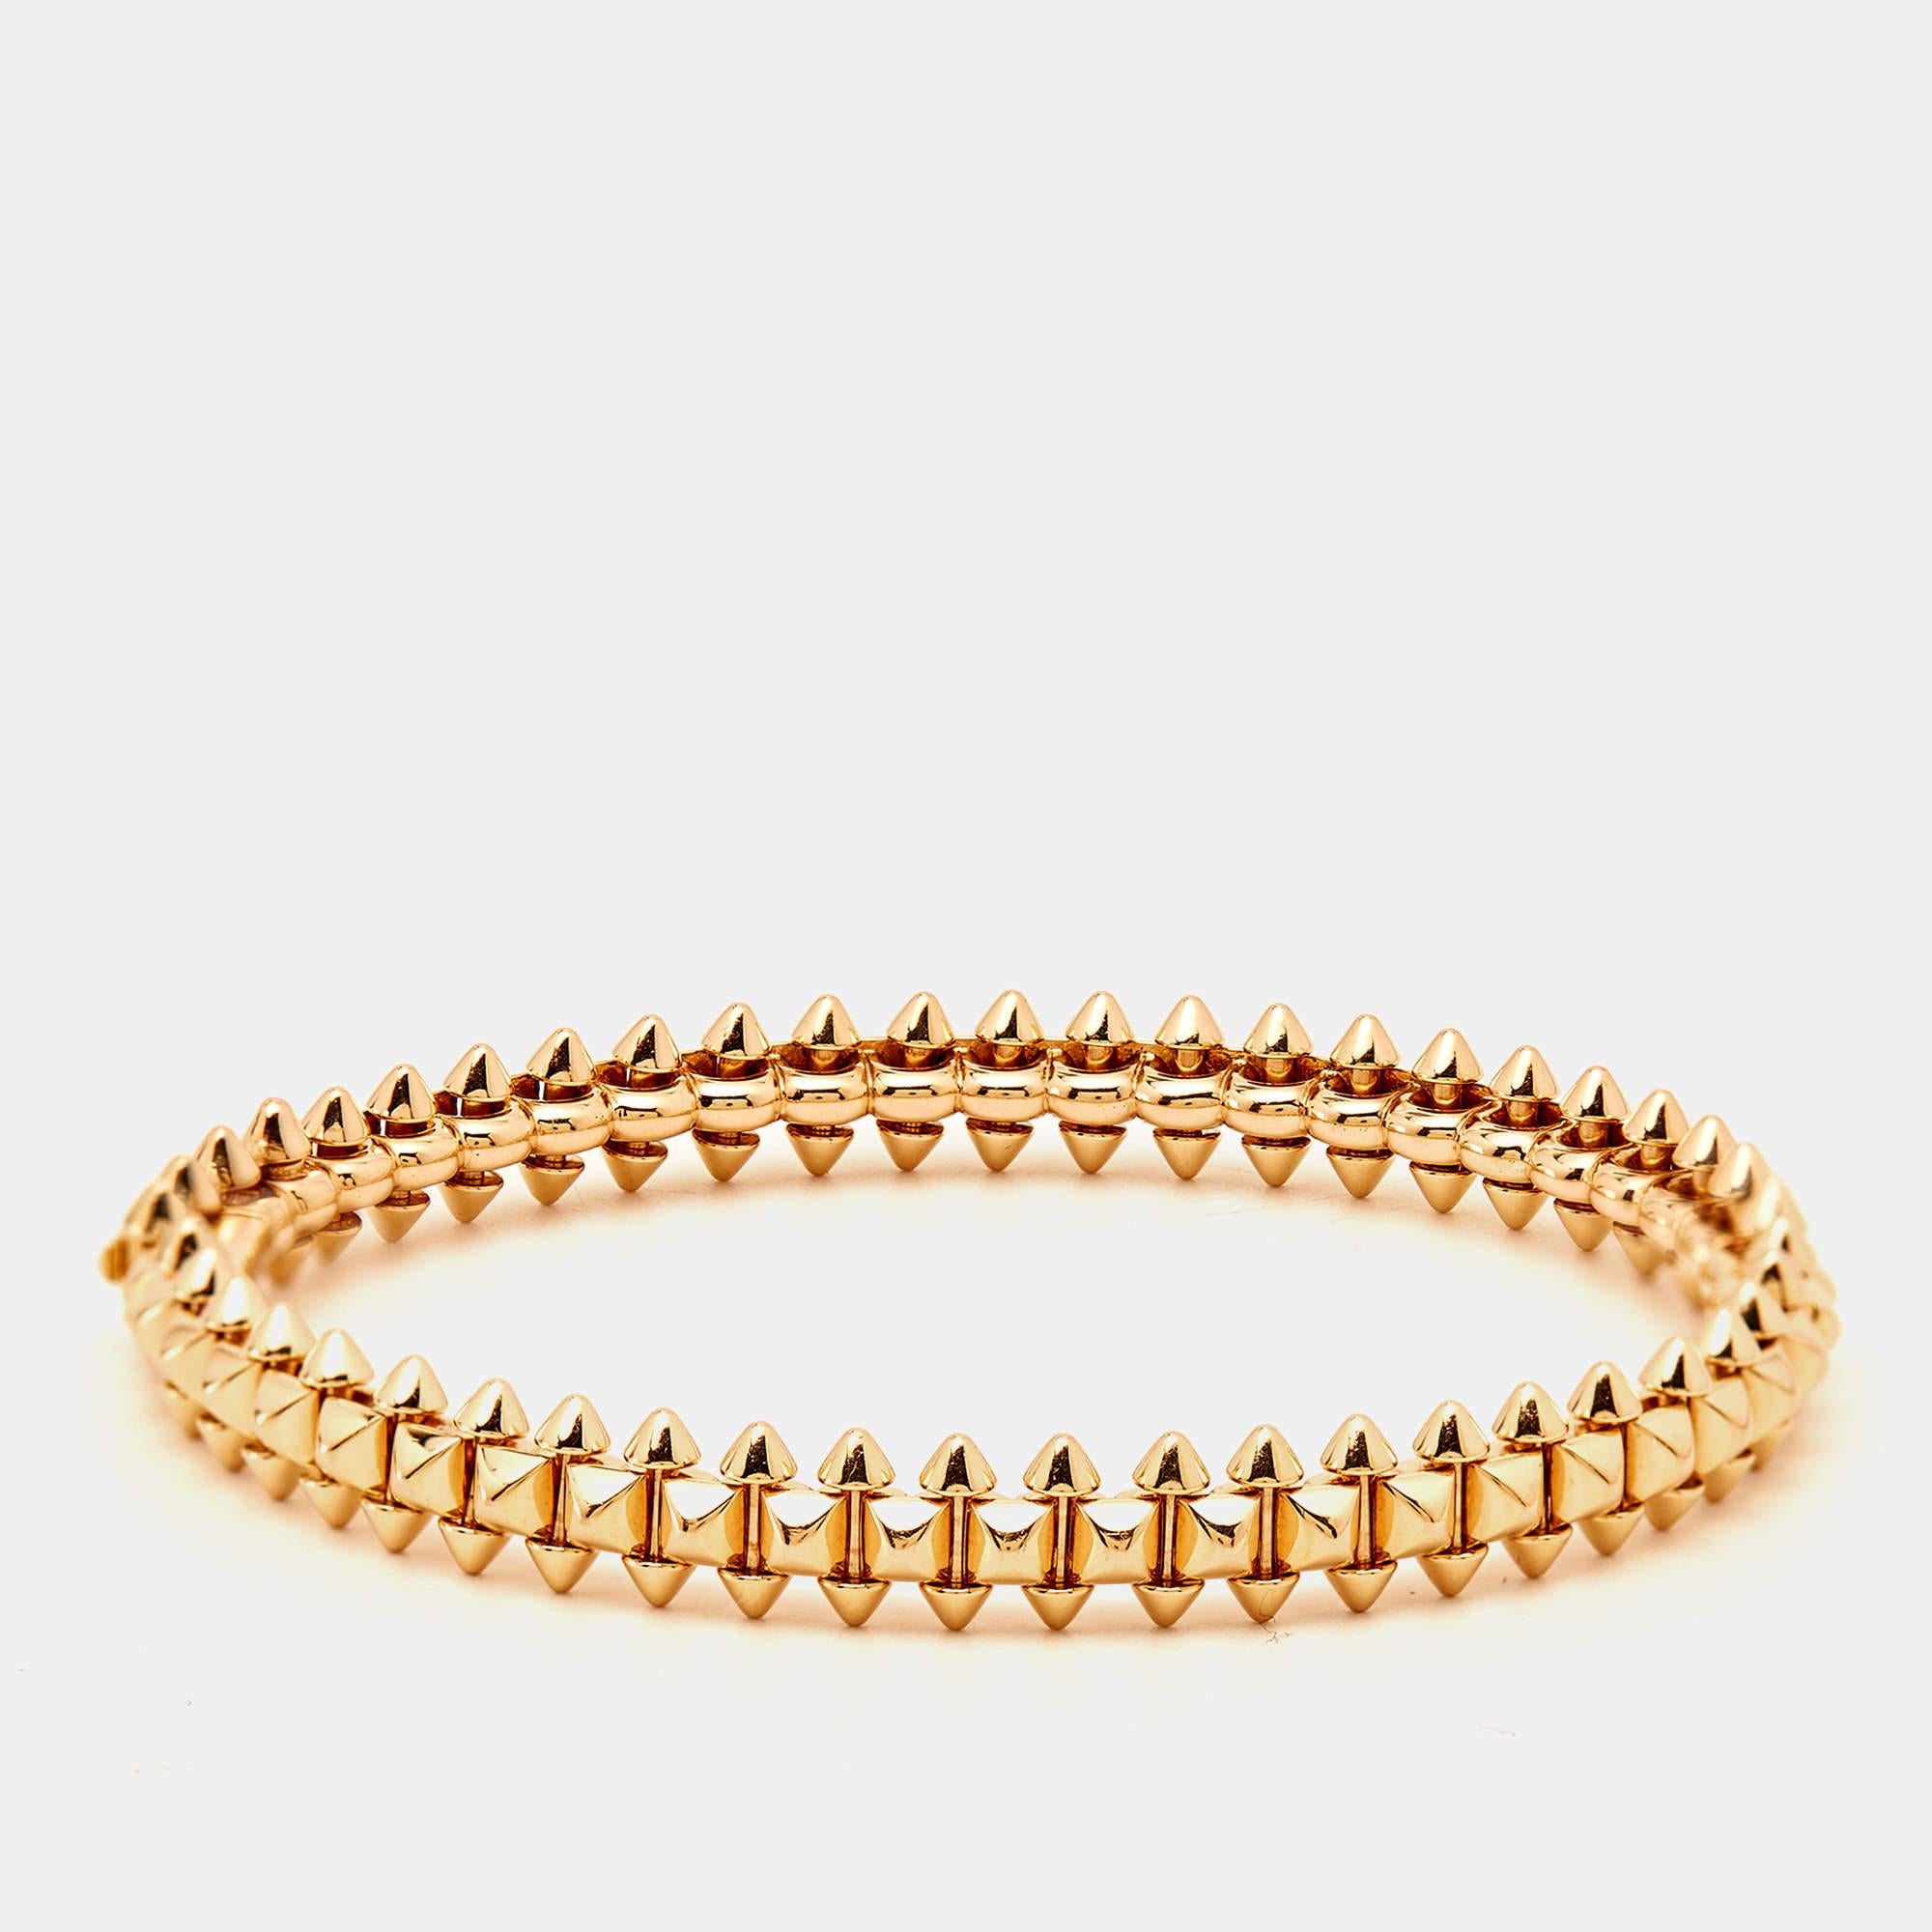 This bracelet from Cartier's Clash de Cartier collection is defined by distinct shapes and classic forms assembled into a band. Meticulously crafted using 18k rose gold, the bracelet has pyramid studs and cone motifs to form a stunning outline